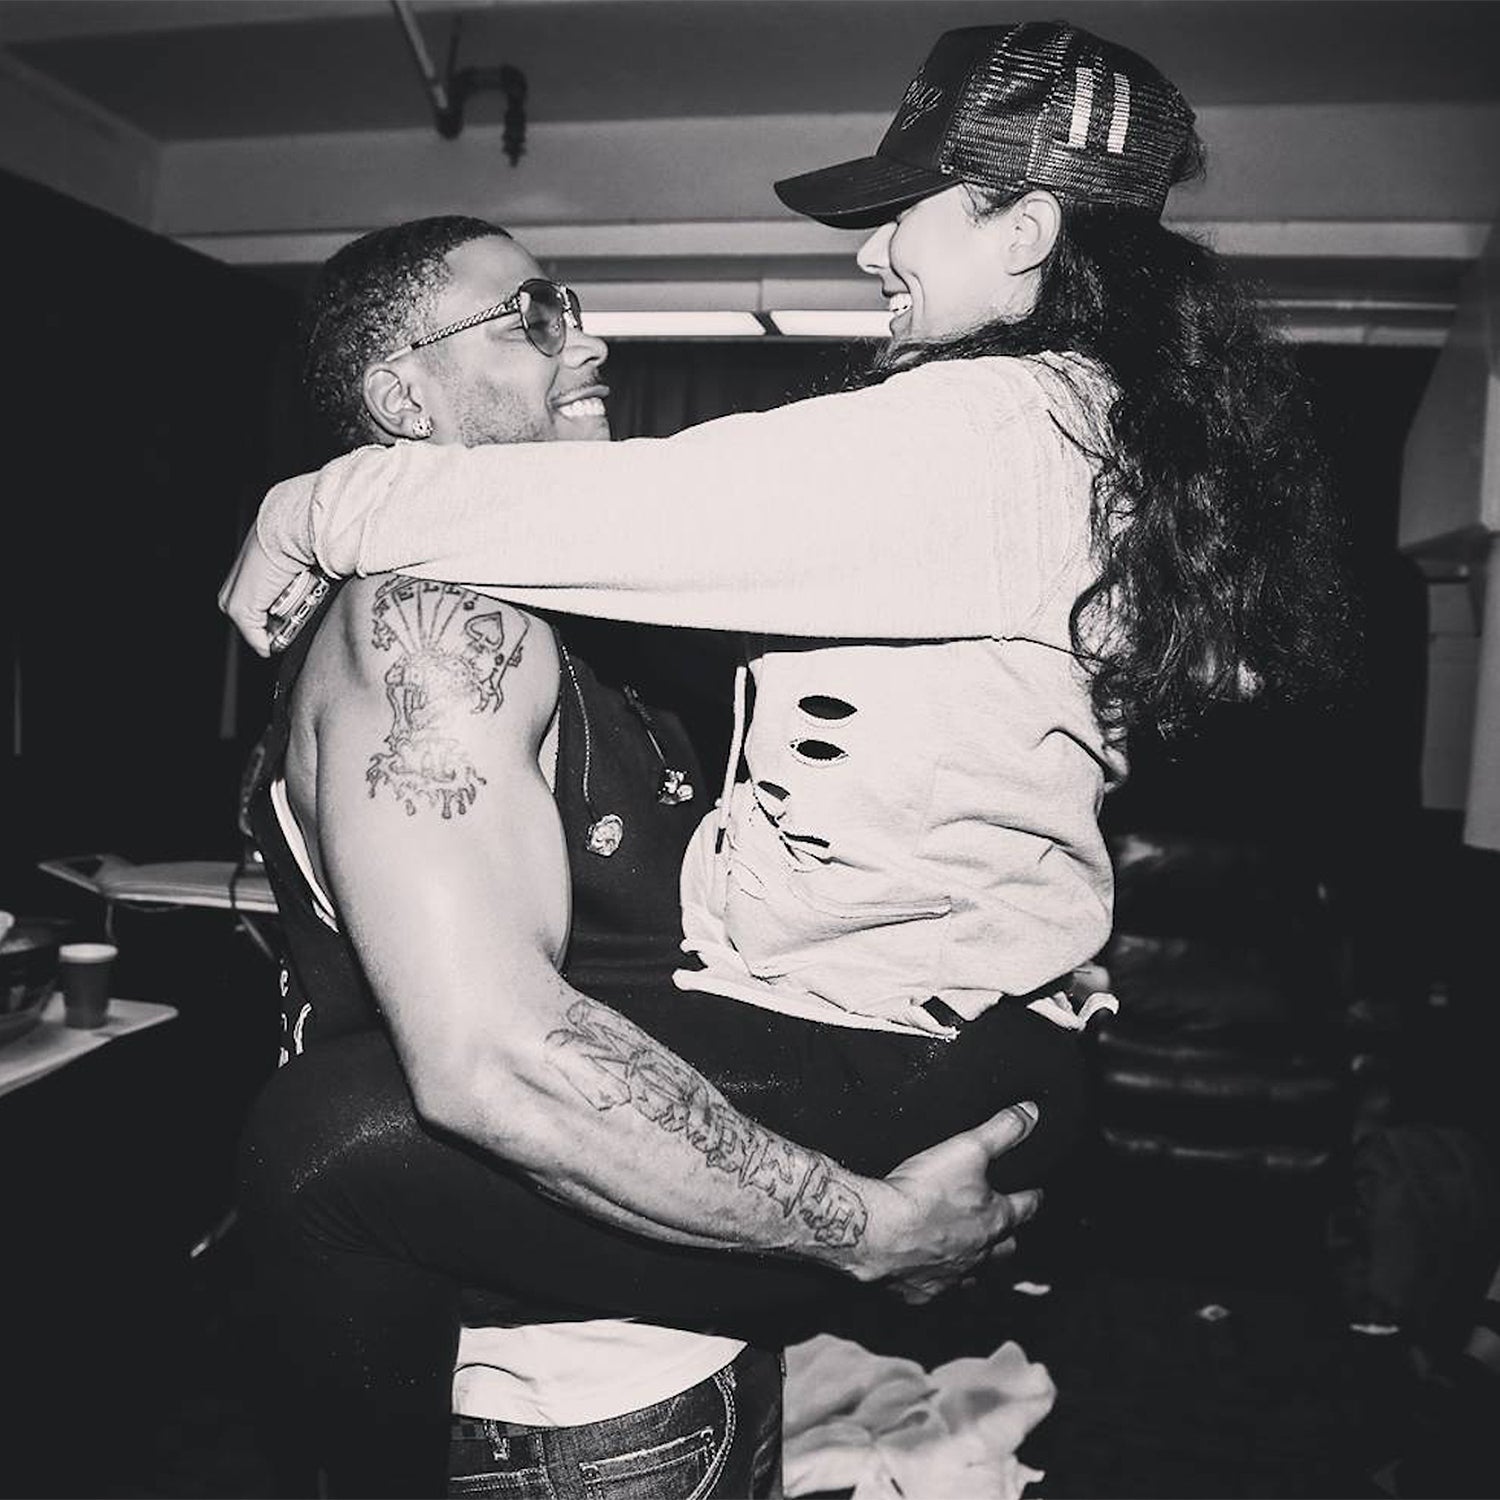 Nelly’s Girlfriend Posts Clip About Their ‘Fun’ Relationship Amidst His Rape Allegations